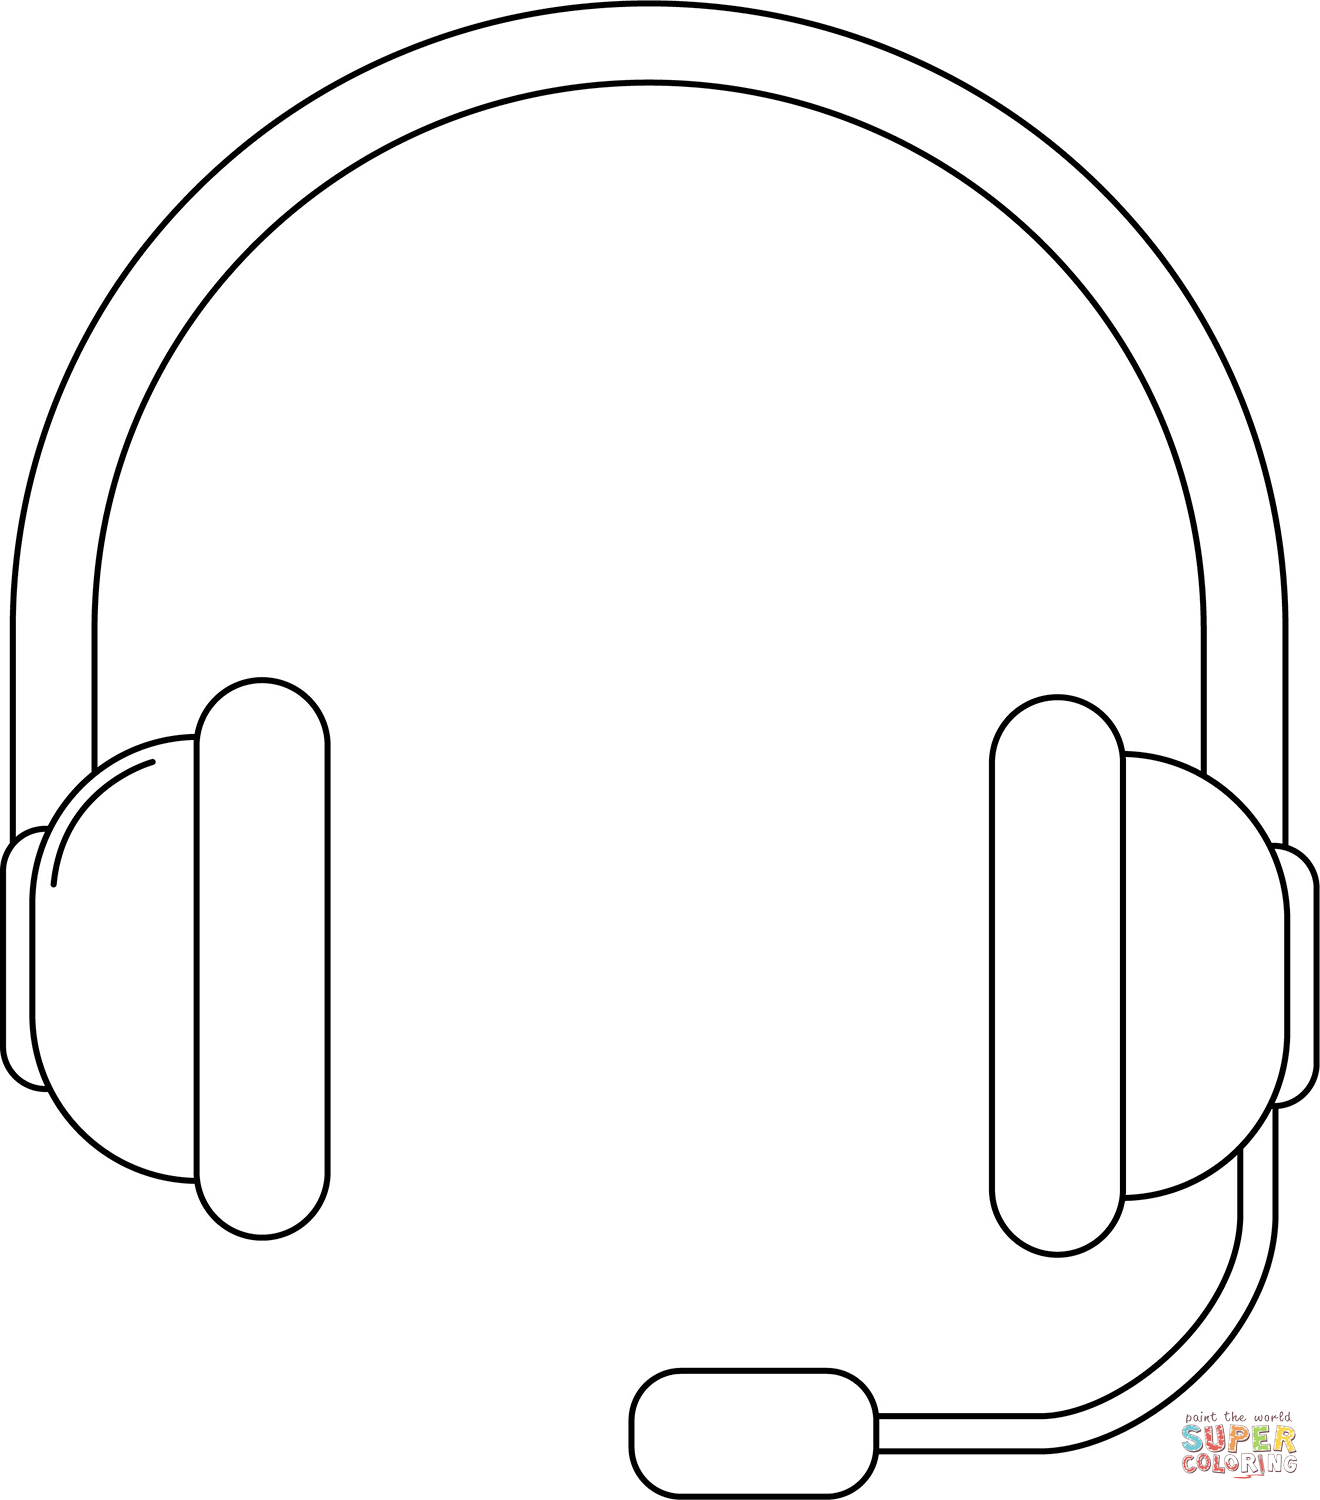 Headset coloring page free printable coloring pages